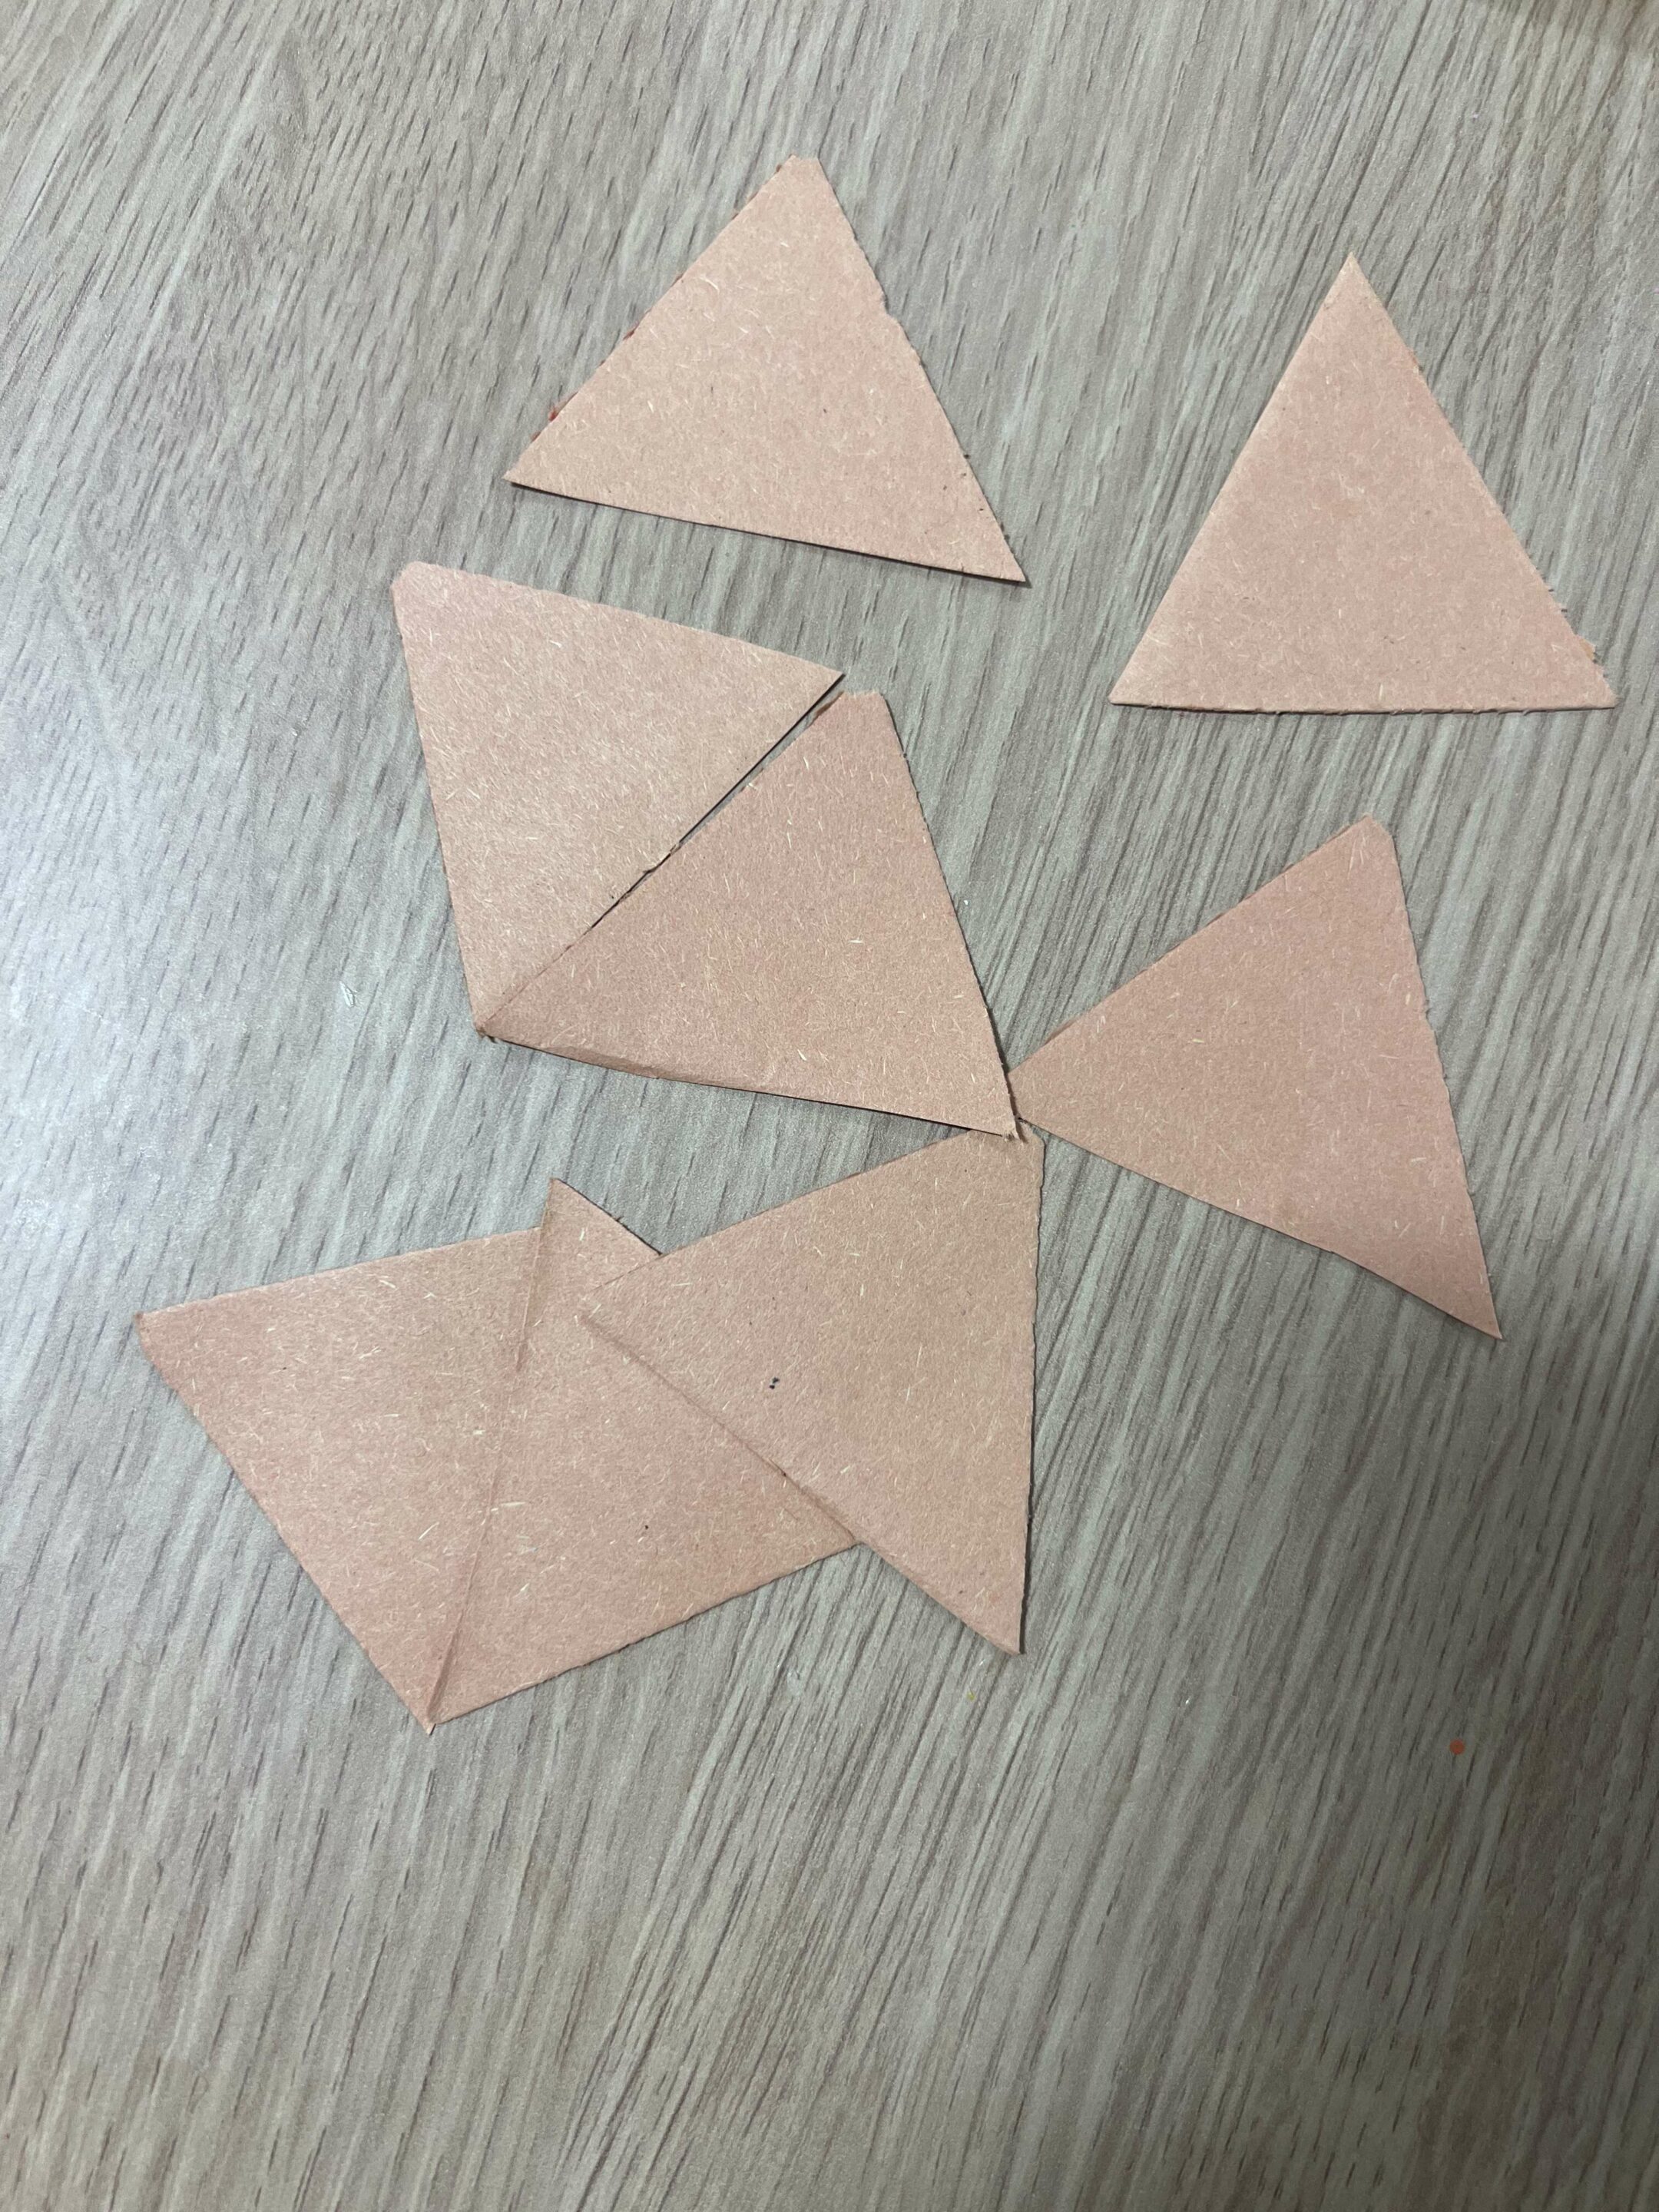 paper triangle shapes